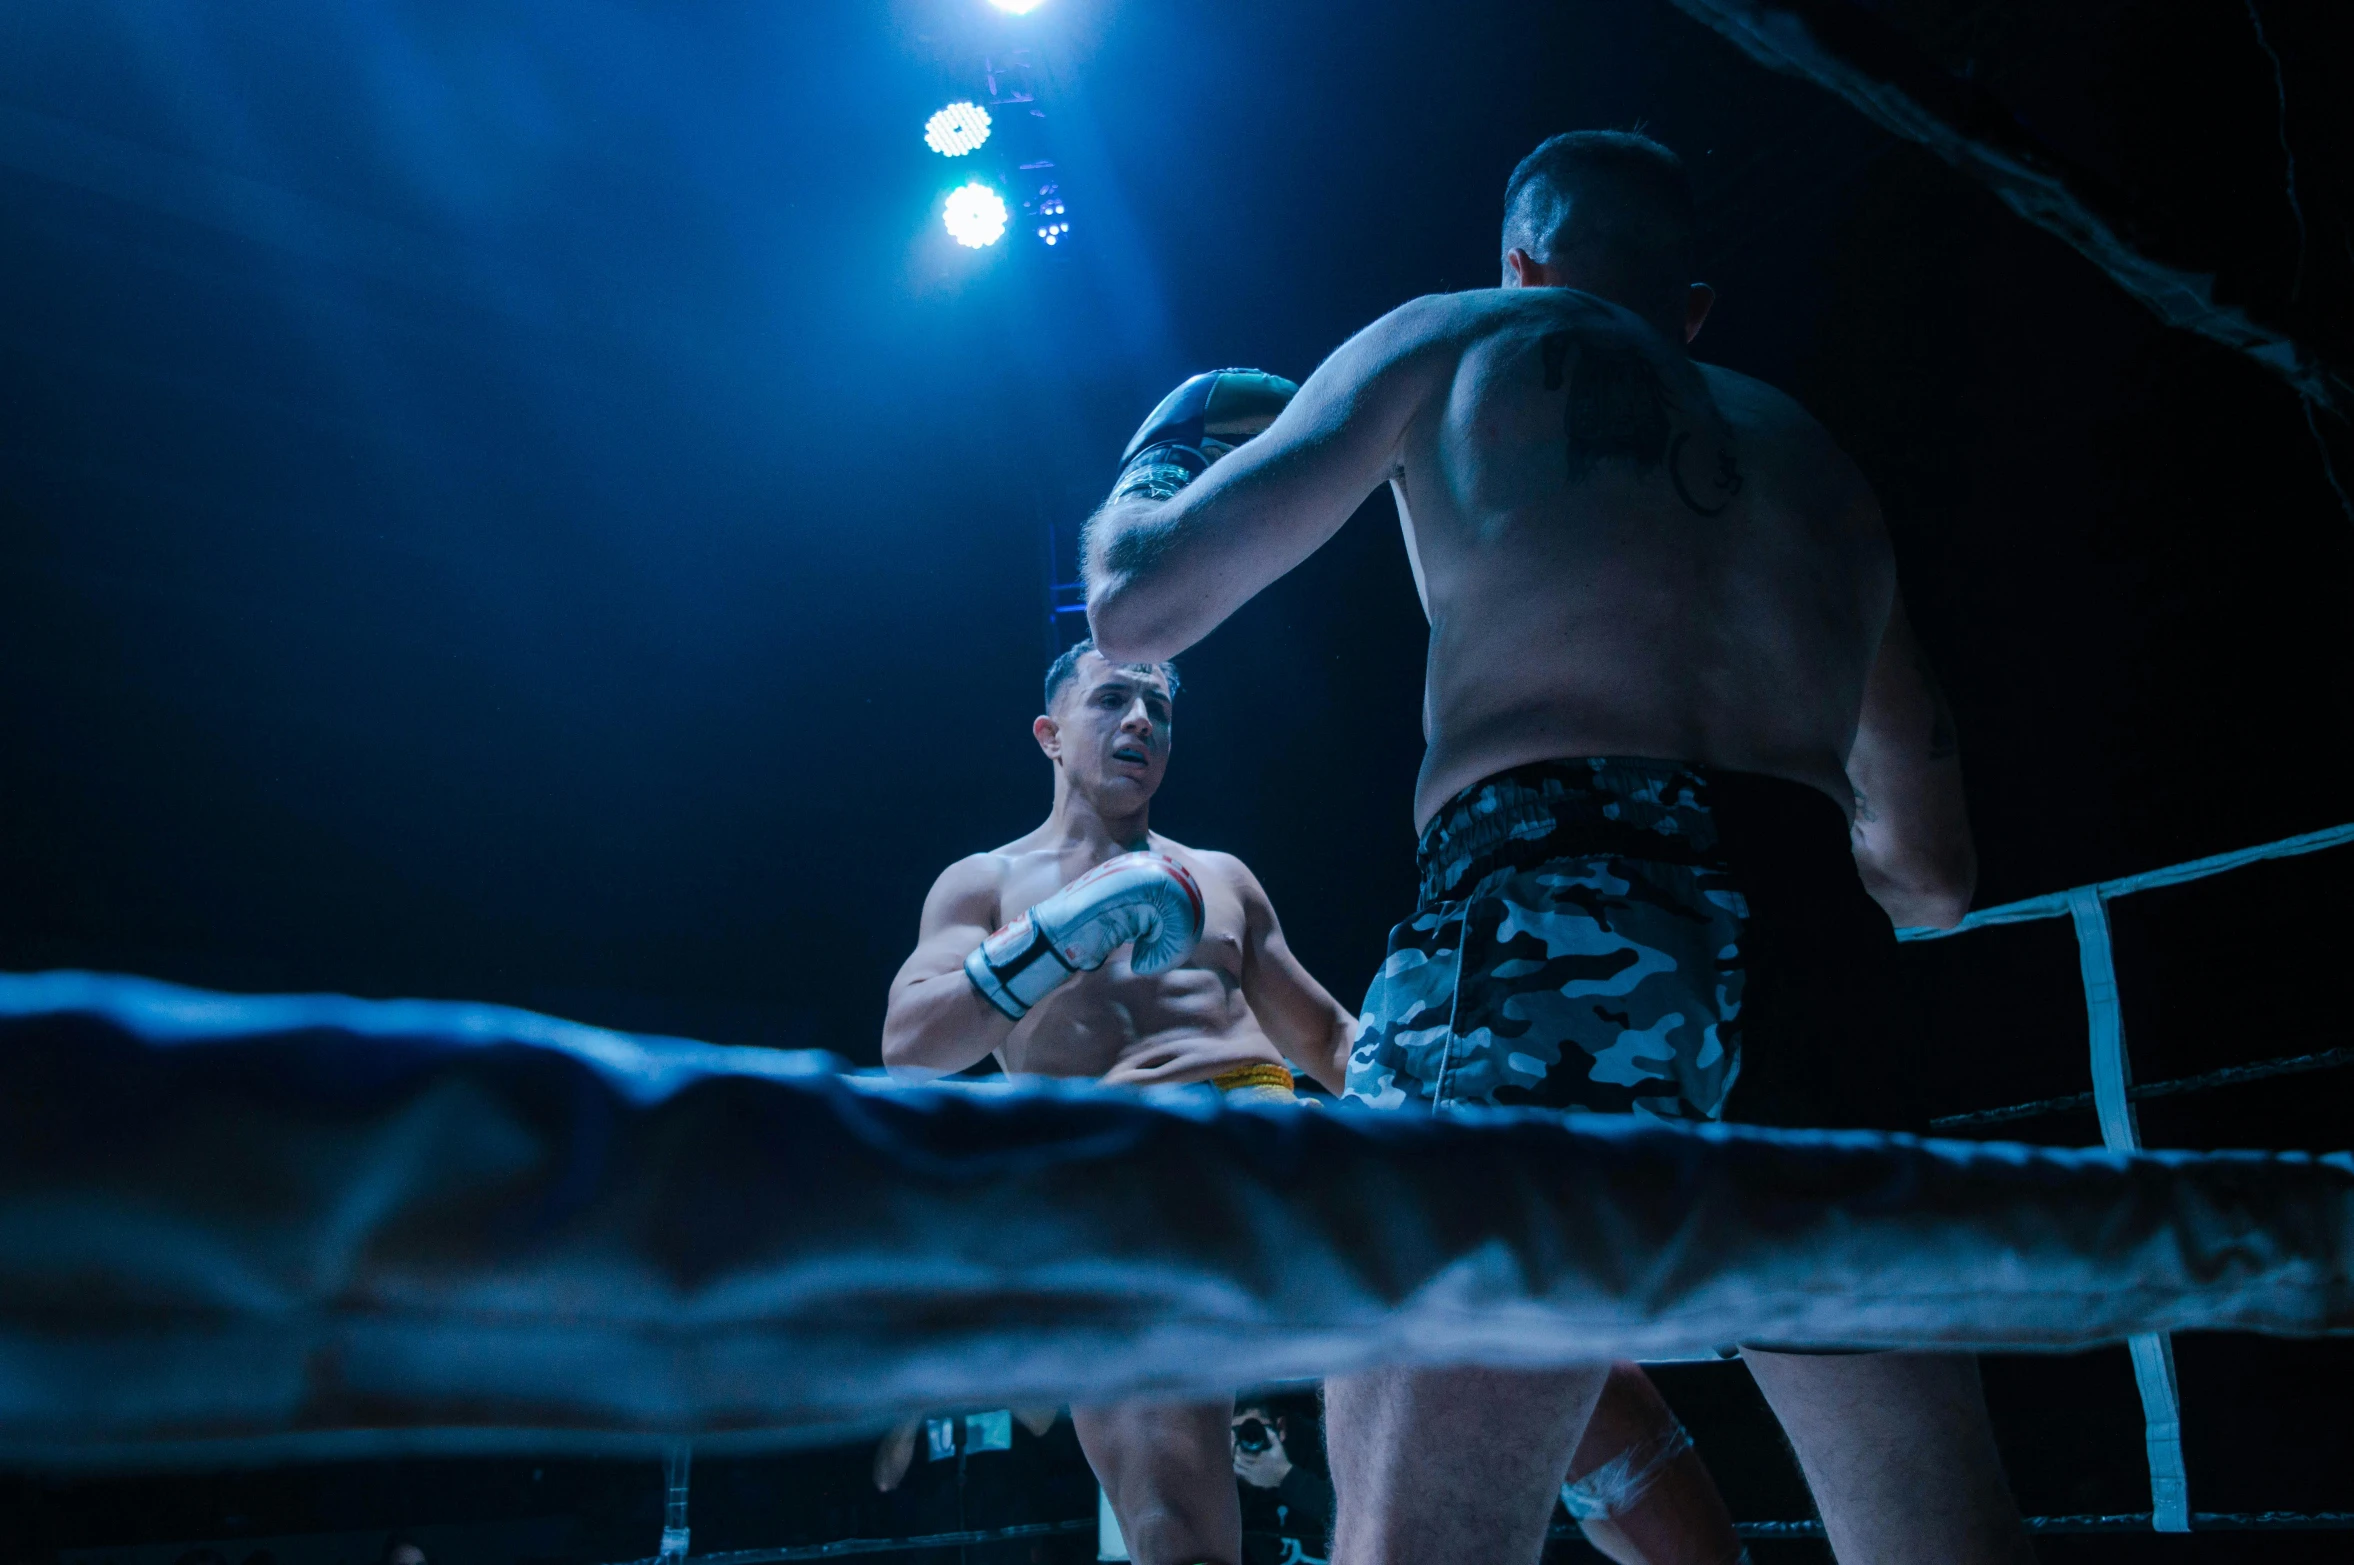 the men are wrestling in a dark boxing ring